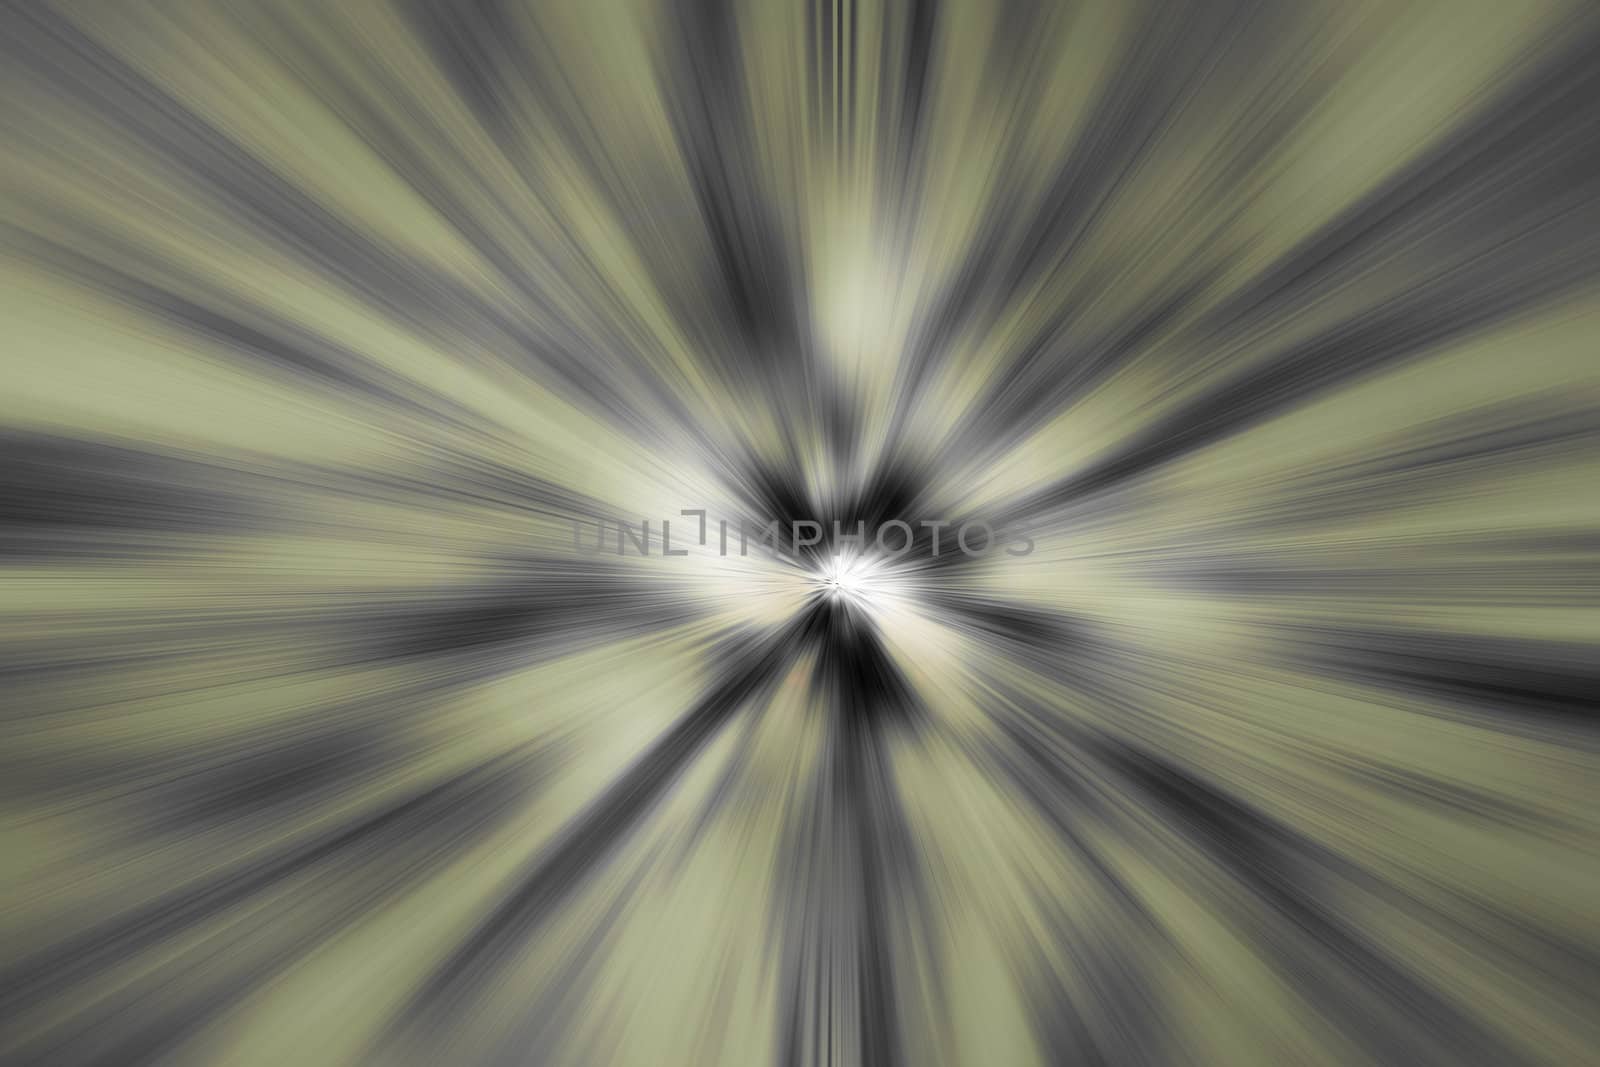   A star burst or lens flare over a black background. It also looks like an abstract illustration of the sun.
